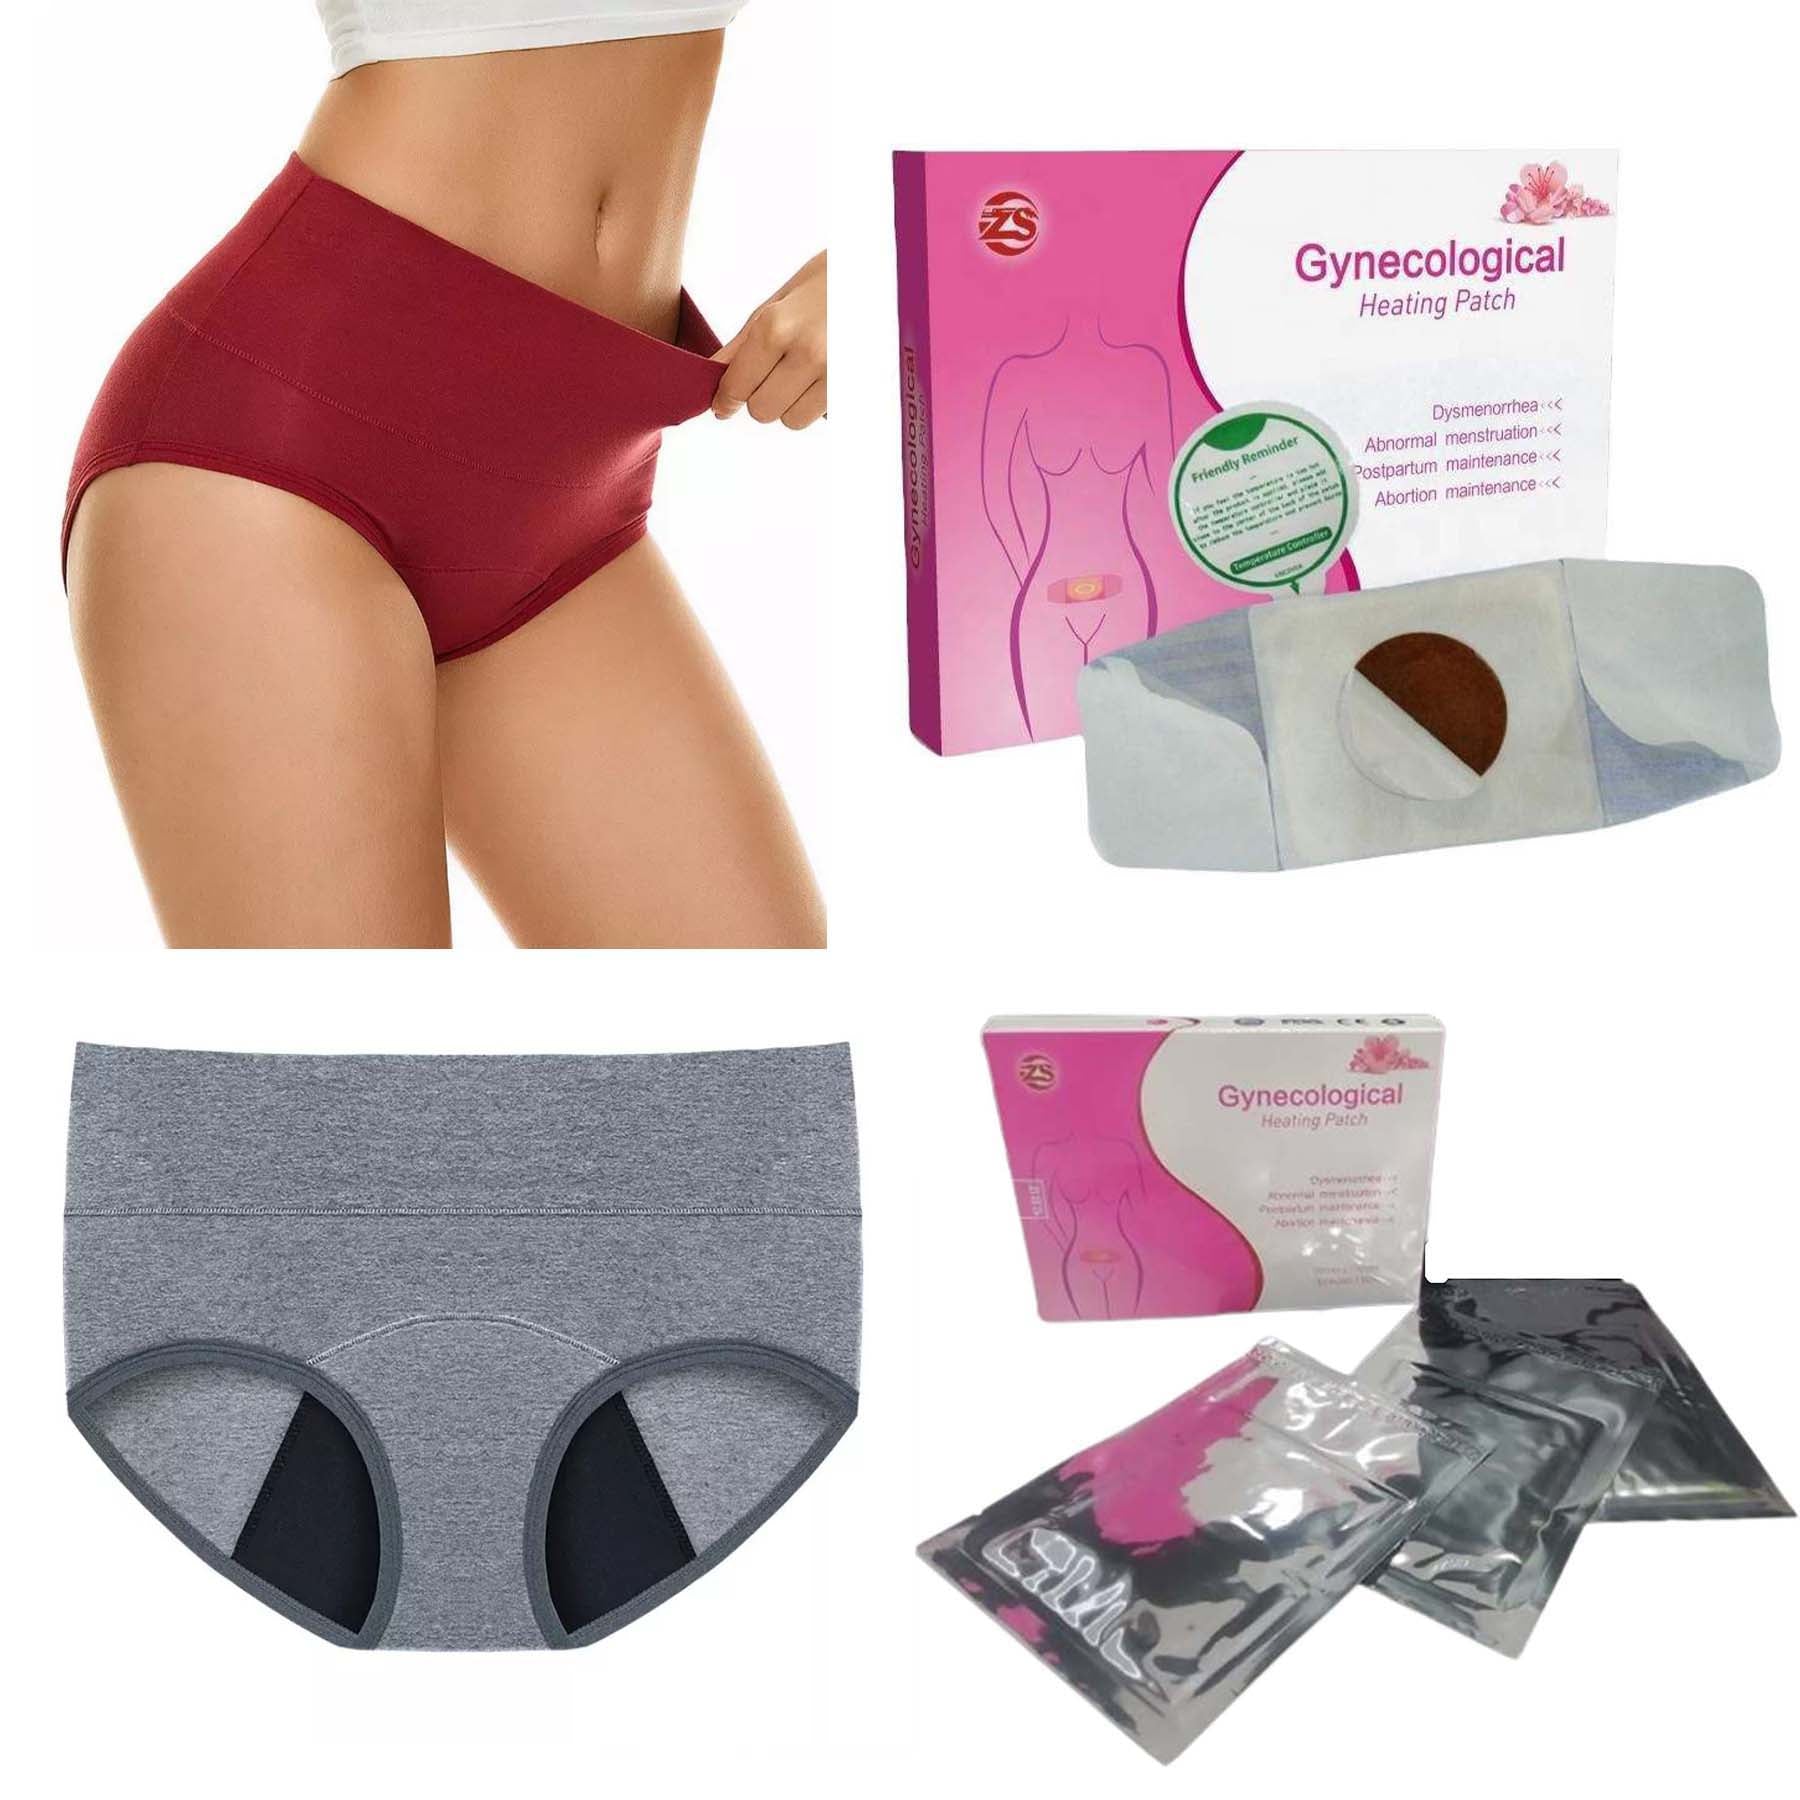  Sleeper Period Underwear by The Period Company, Super-Absorbent Menstrual, Incontinence, Postpartum, Leak-Proof Panties